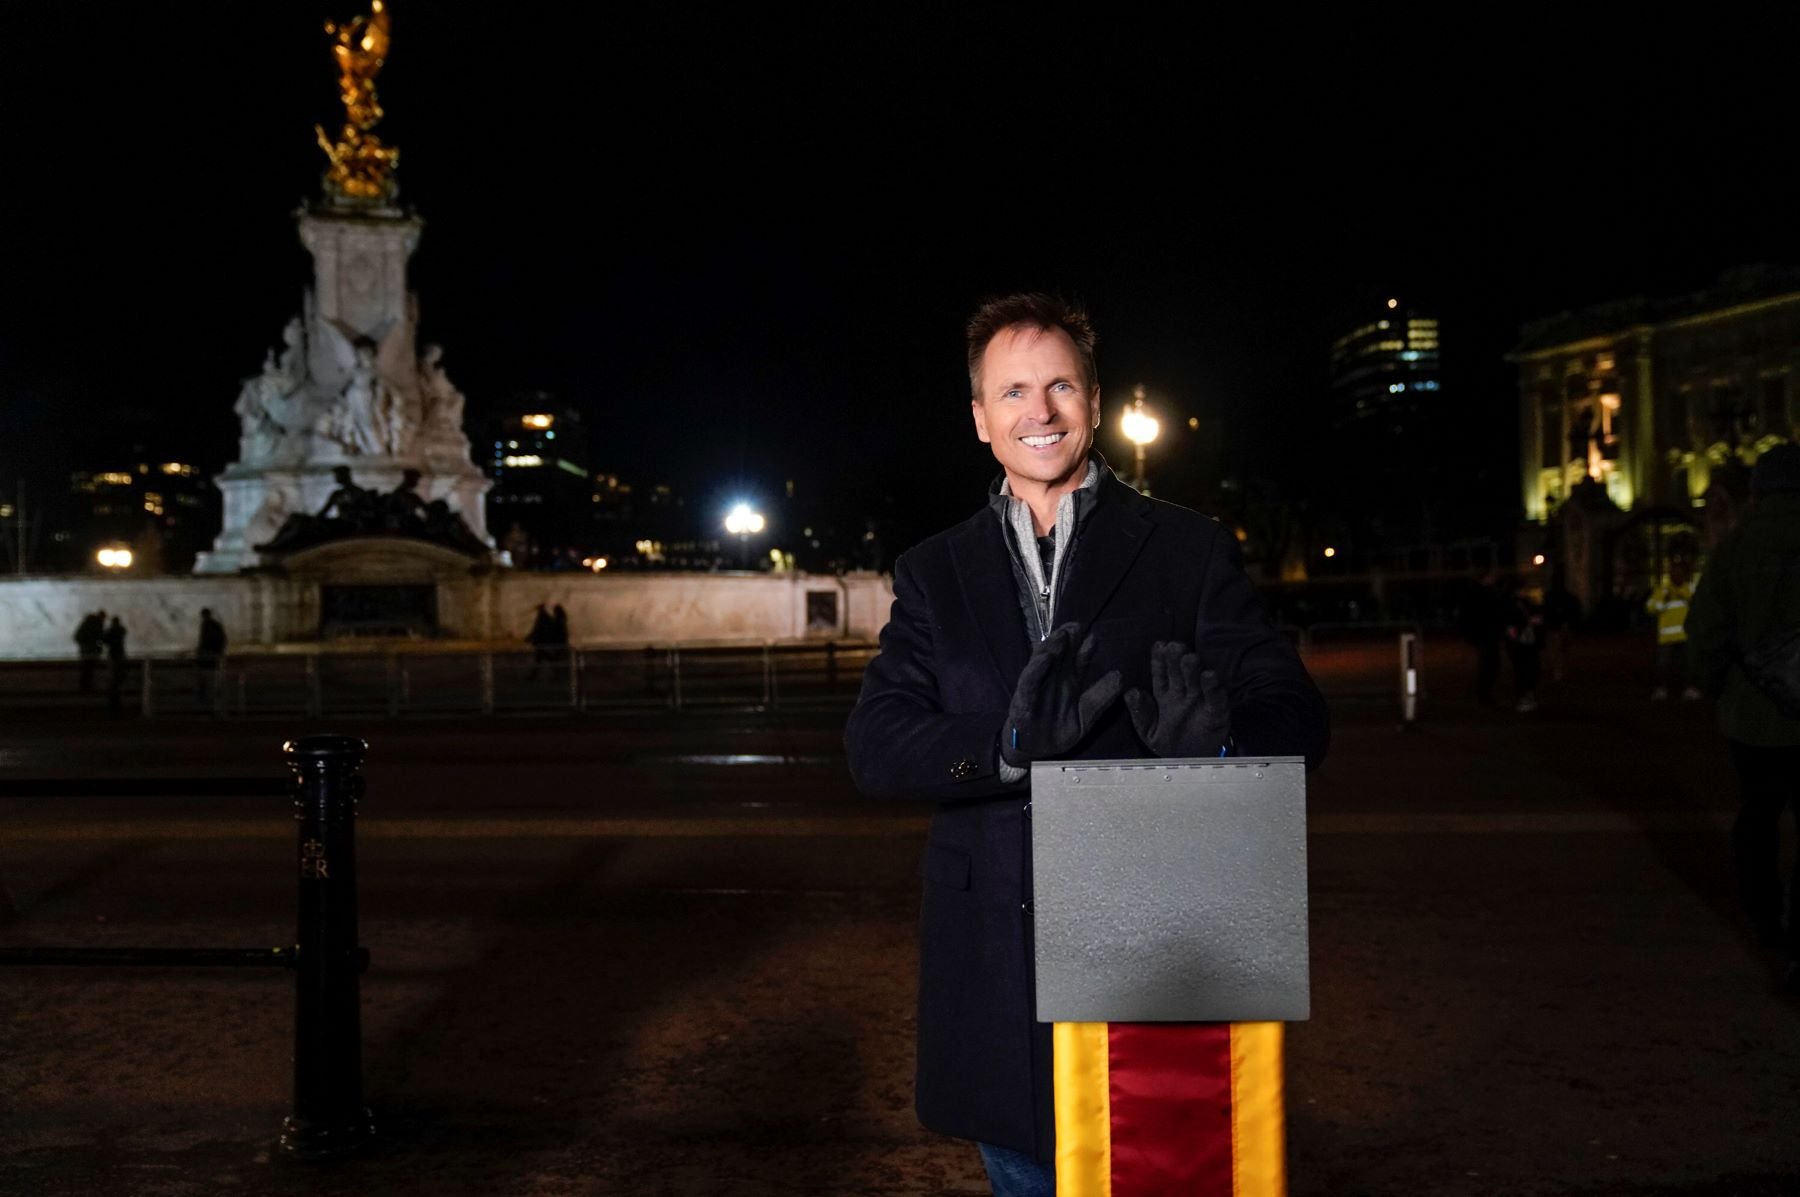 Phil Keoghan, the host of 'The Amazing Race' on CBS, wears a black coat and stands in front of a clue box.